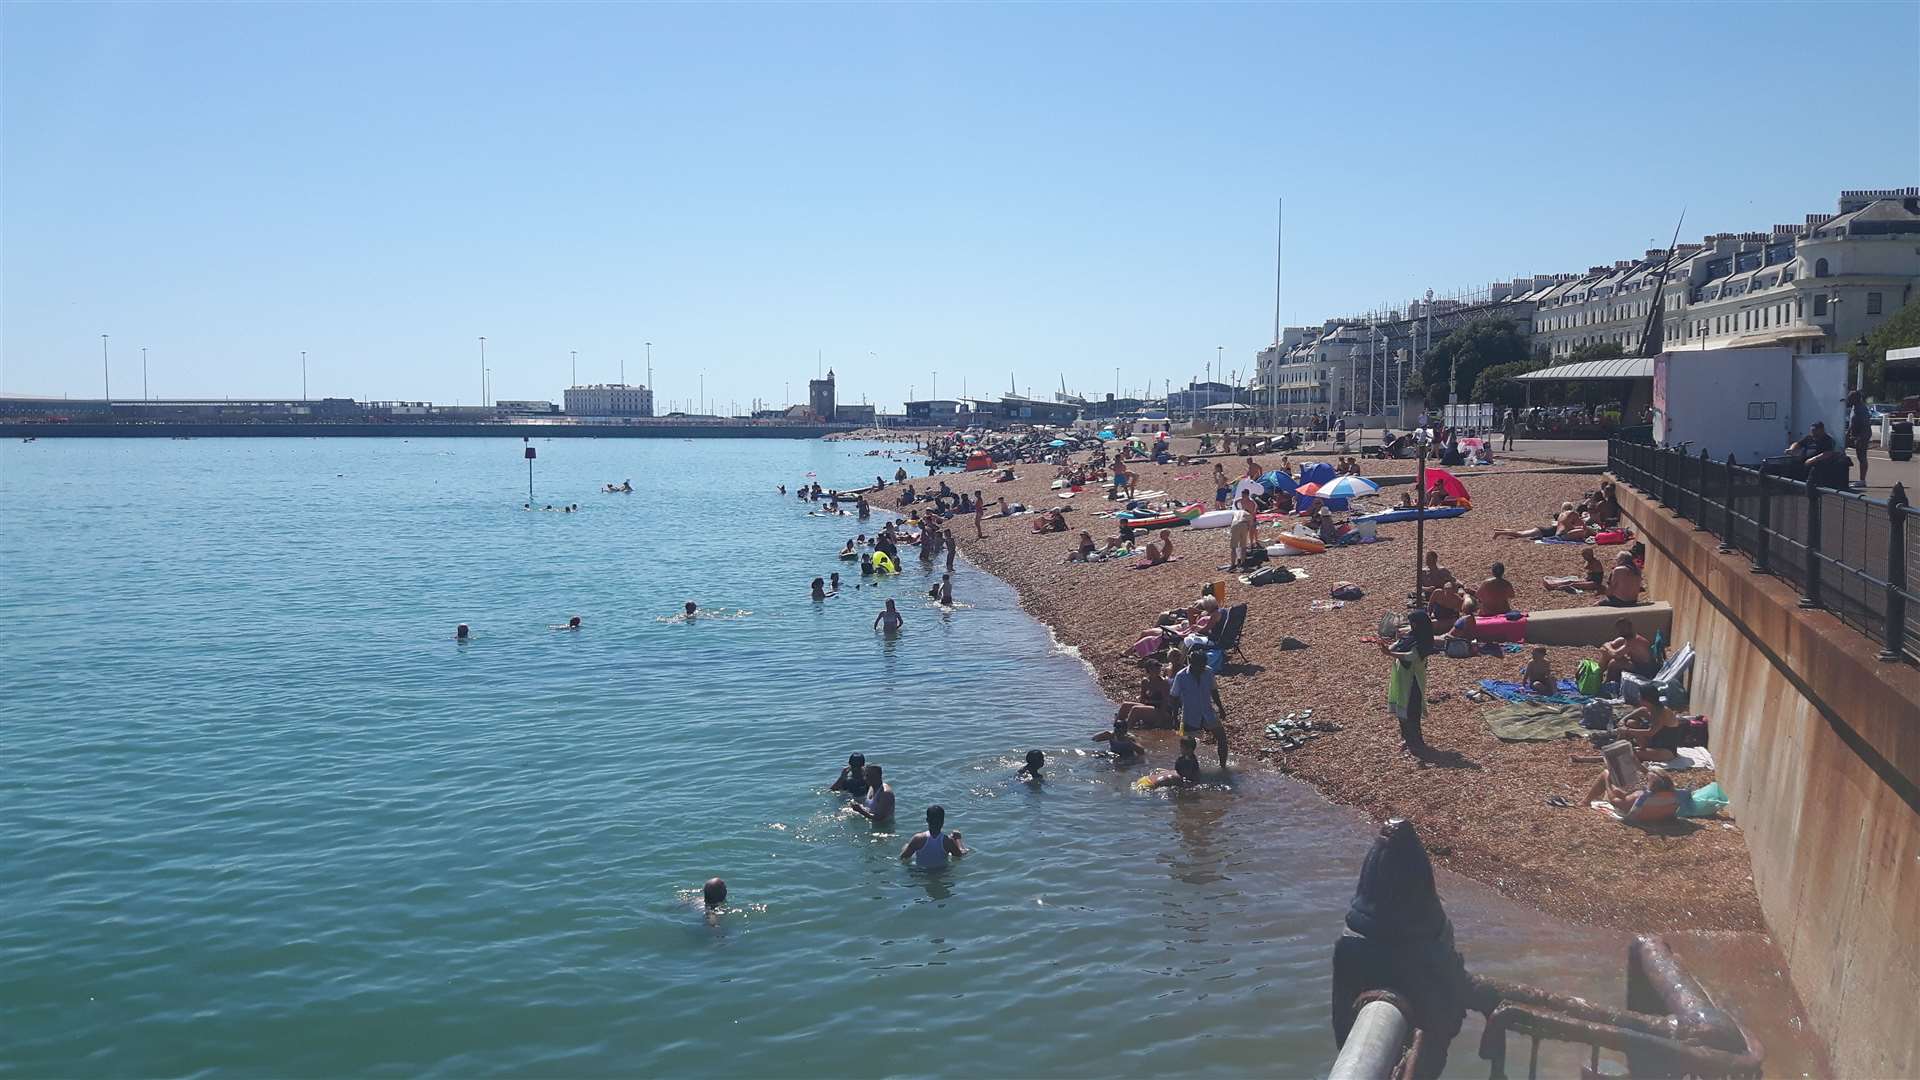 Dover beach was closed to swimmers on Sunday because of the levels of E-coli in the water